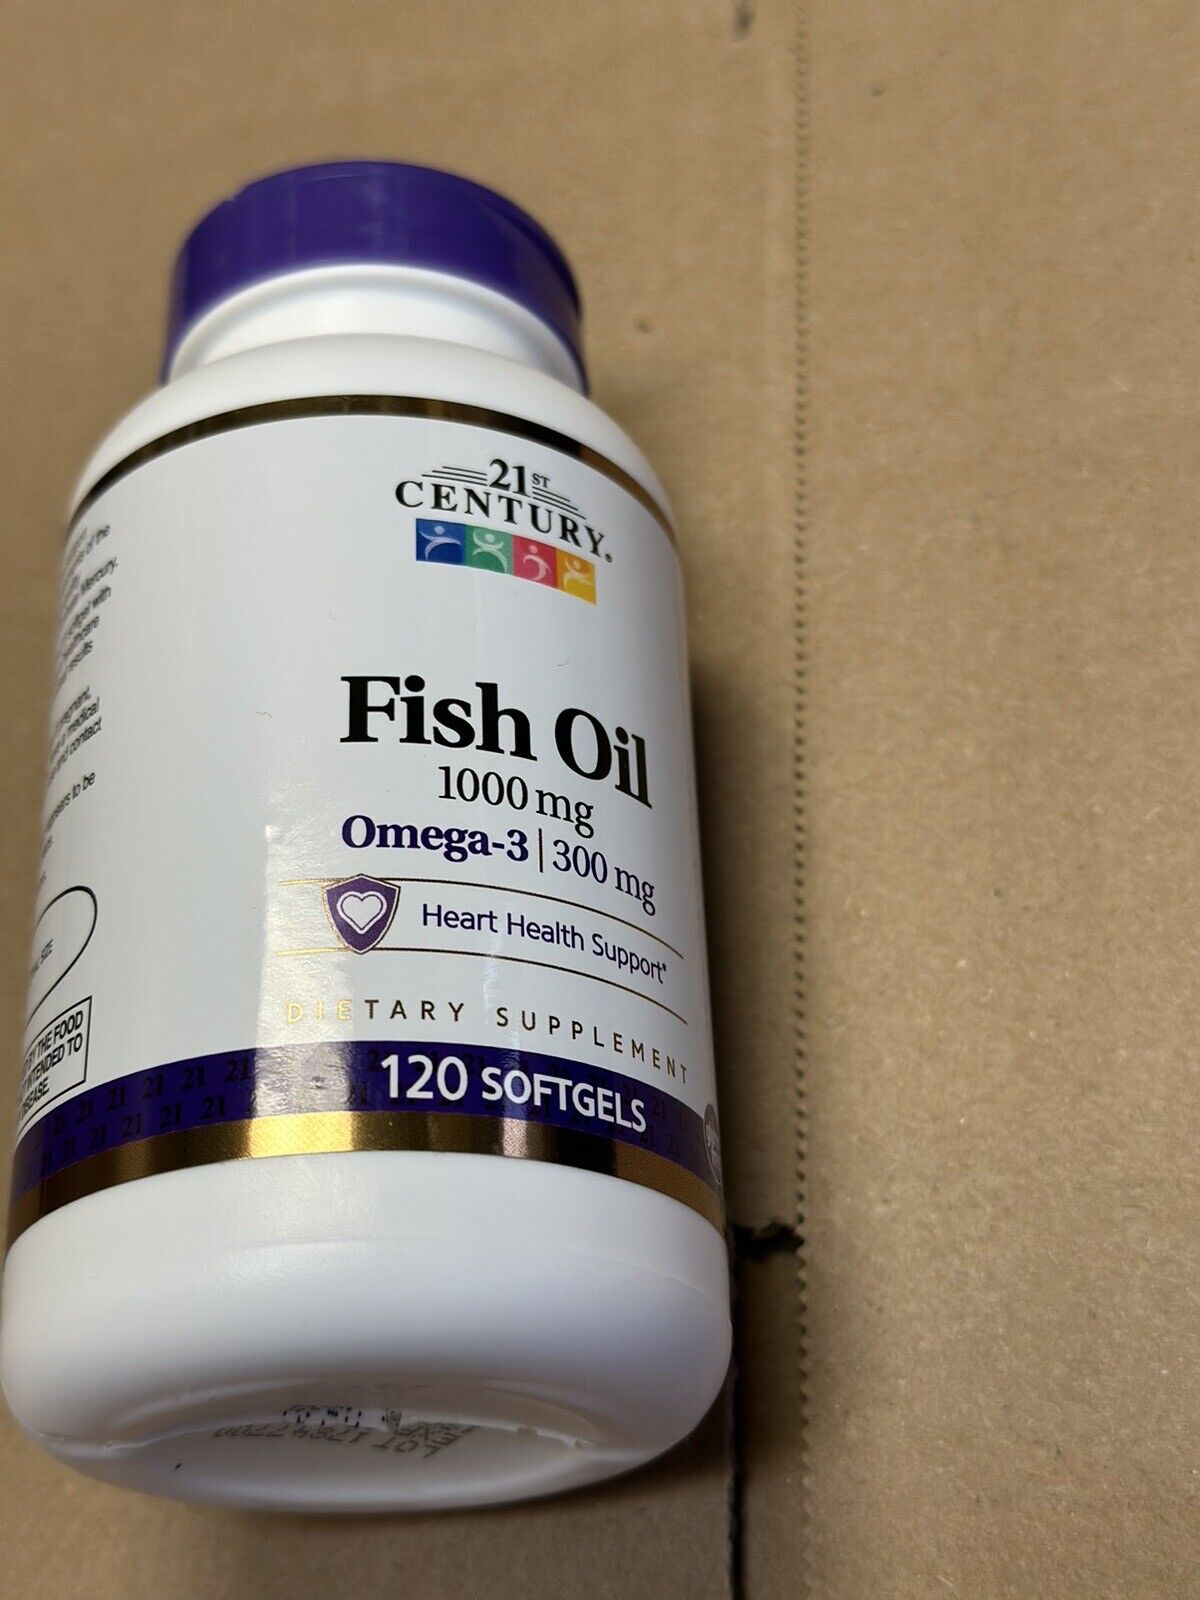 21st Century Fish Oil 1000mg Omega 3 300mg Heart Health Support Softgels 120ct